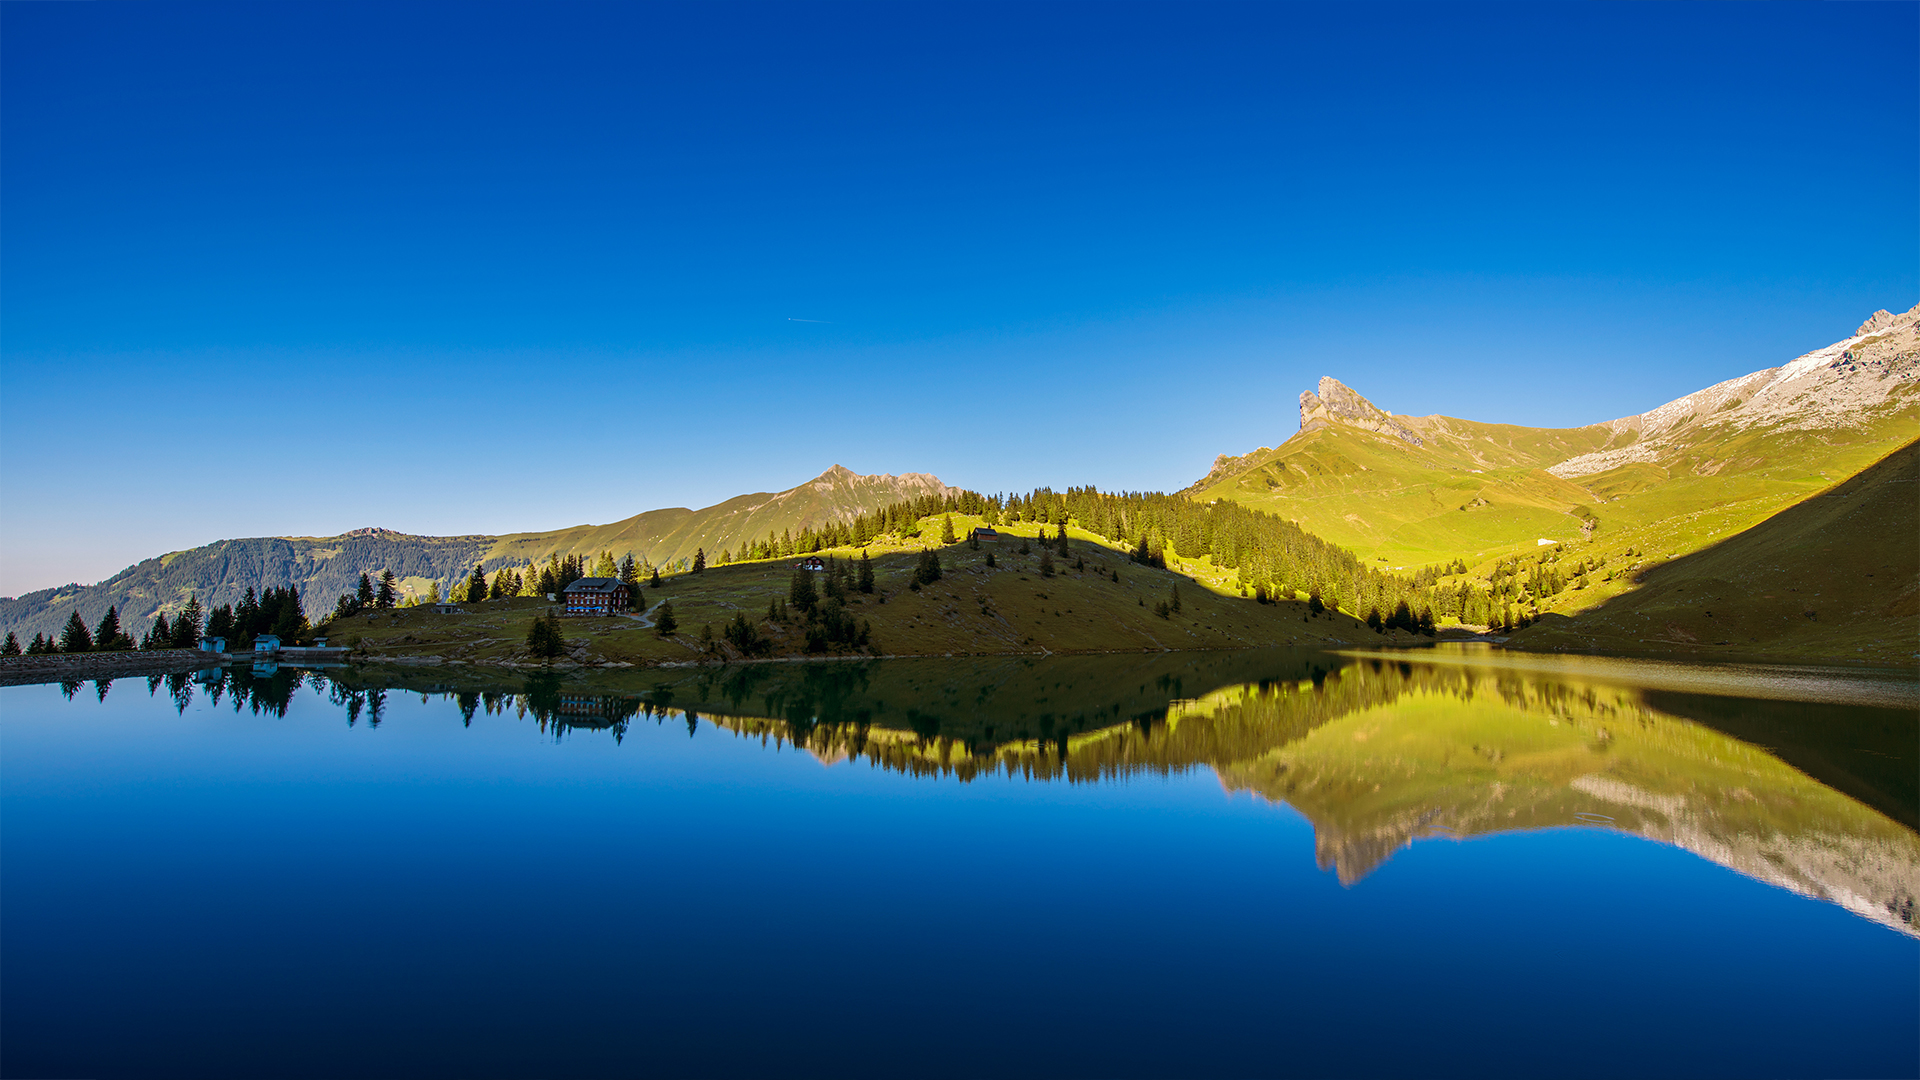 General 1920x1080 reflection lake mountains trees clear sky nature calm waters sky blue blue sky sunlight